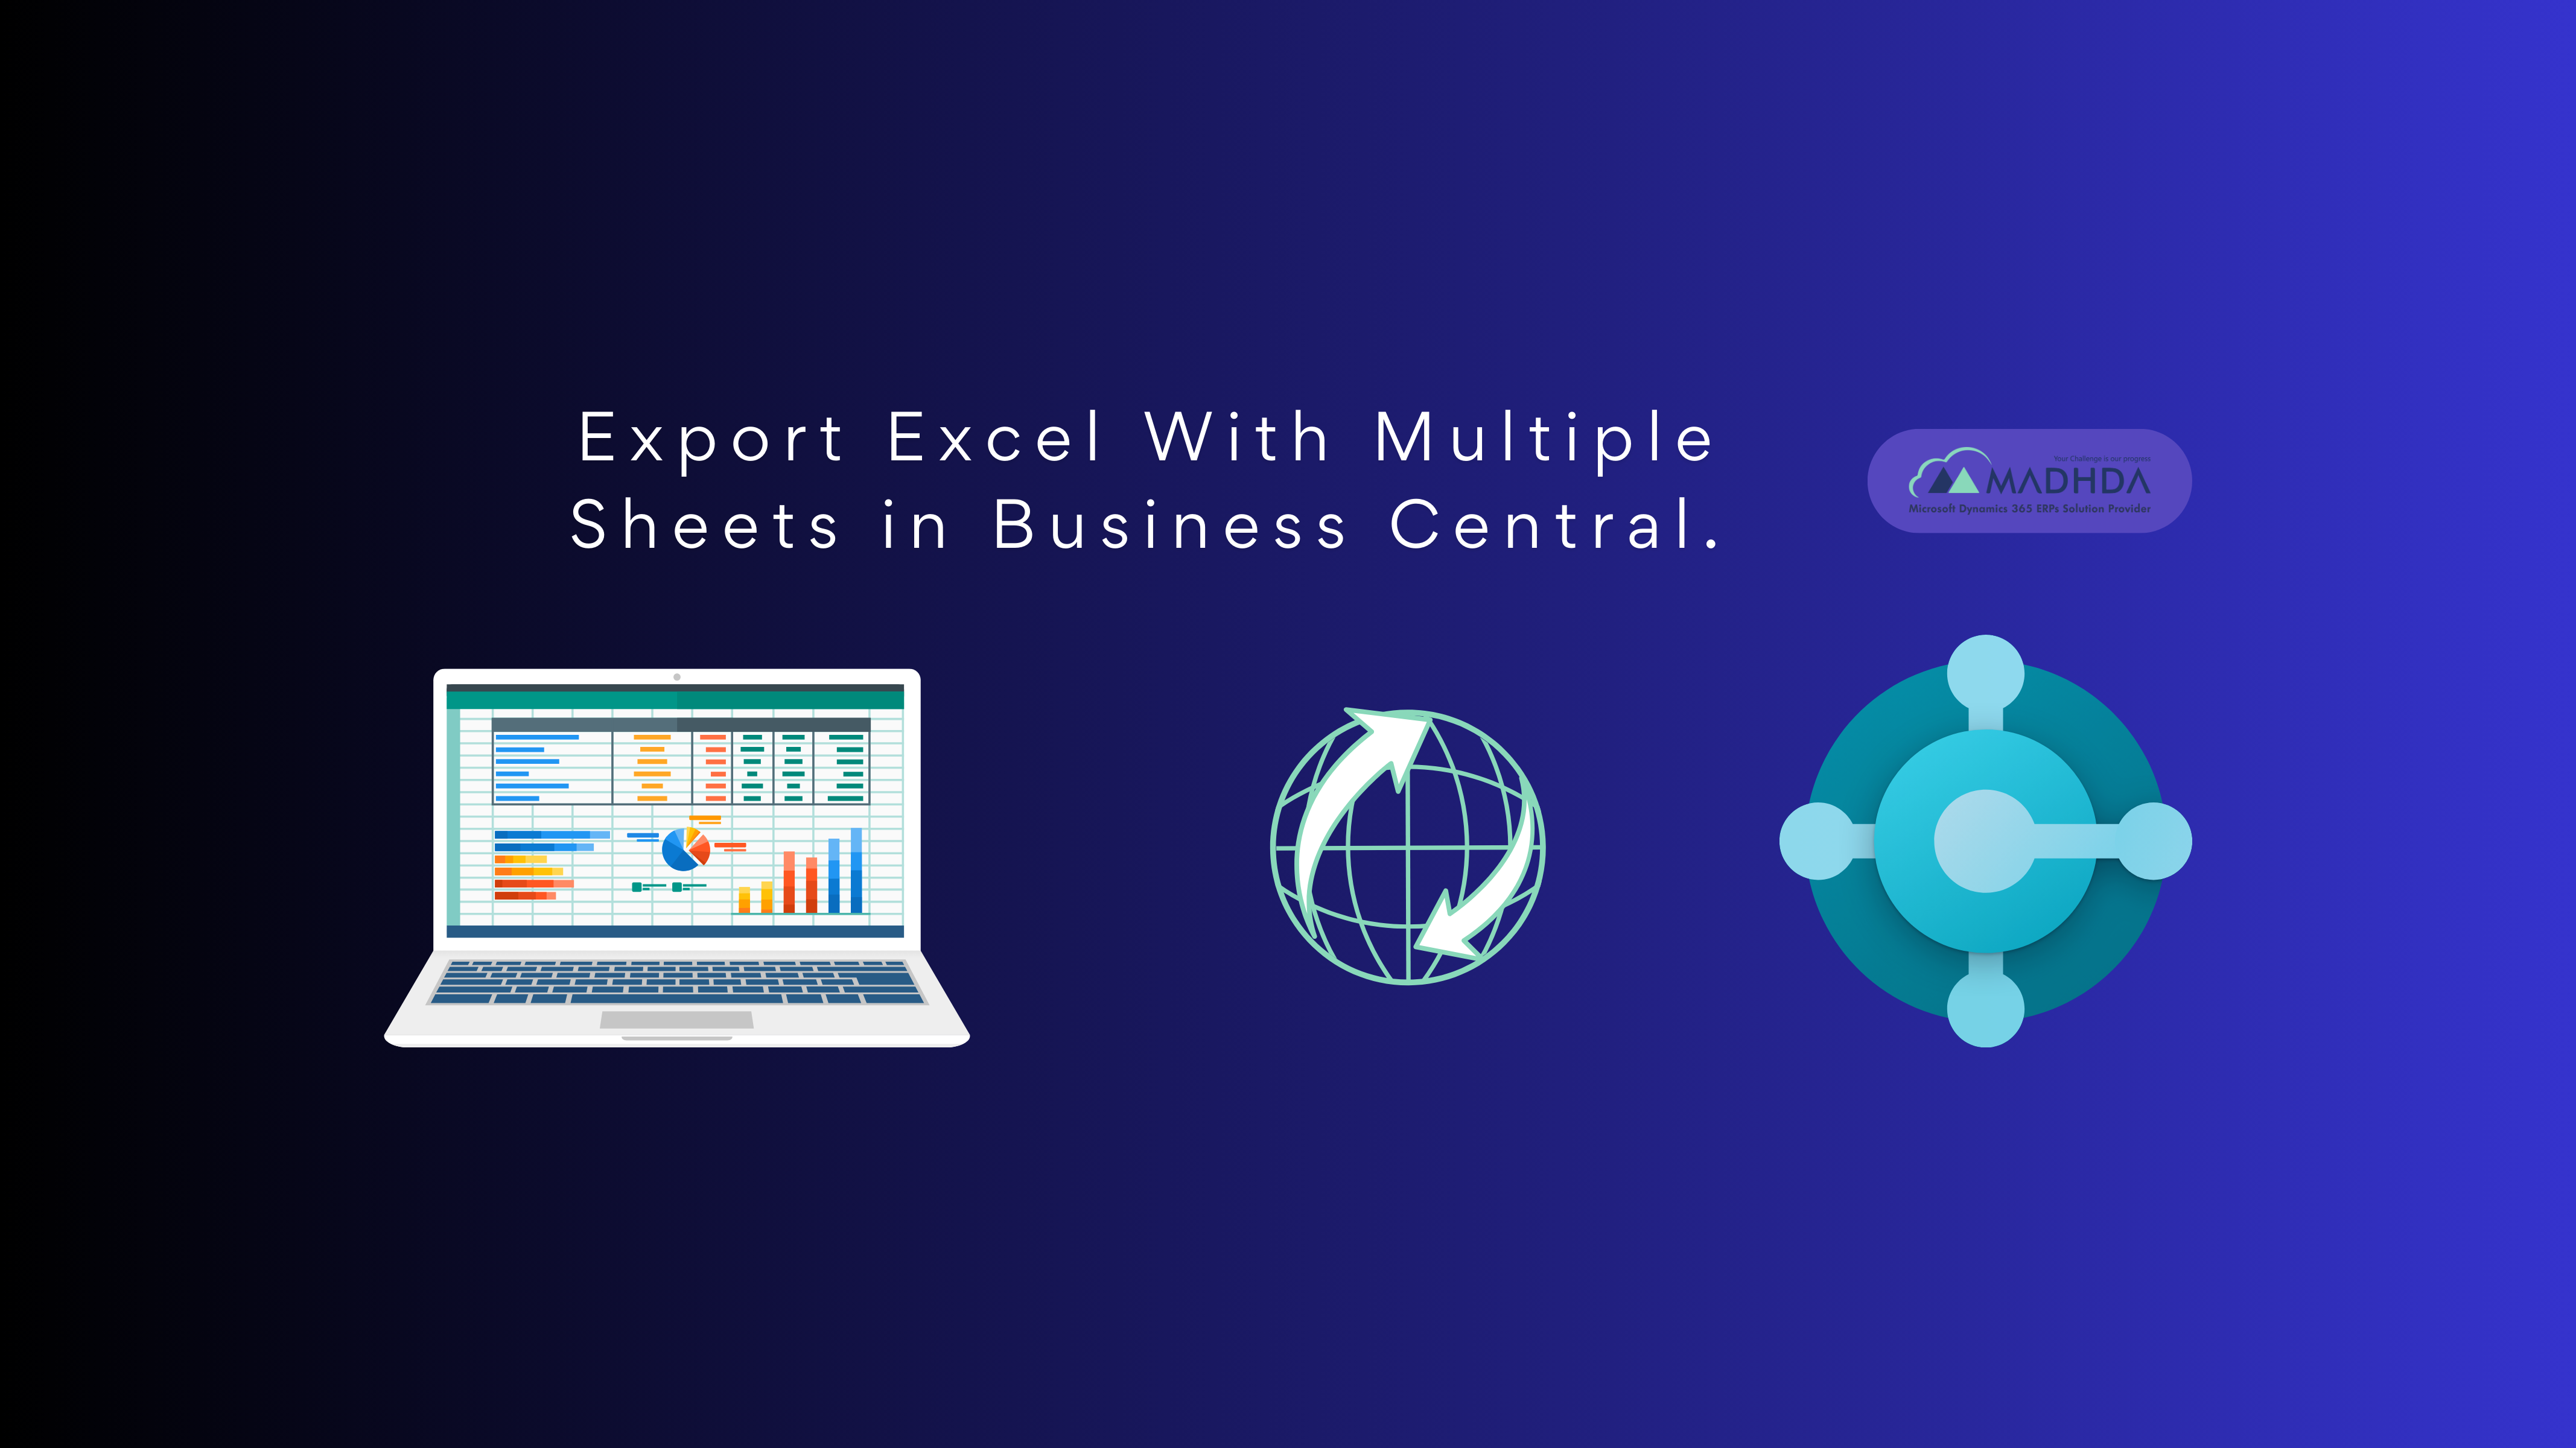 Export Excel With Multiple Sheets in Business Central.